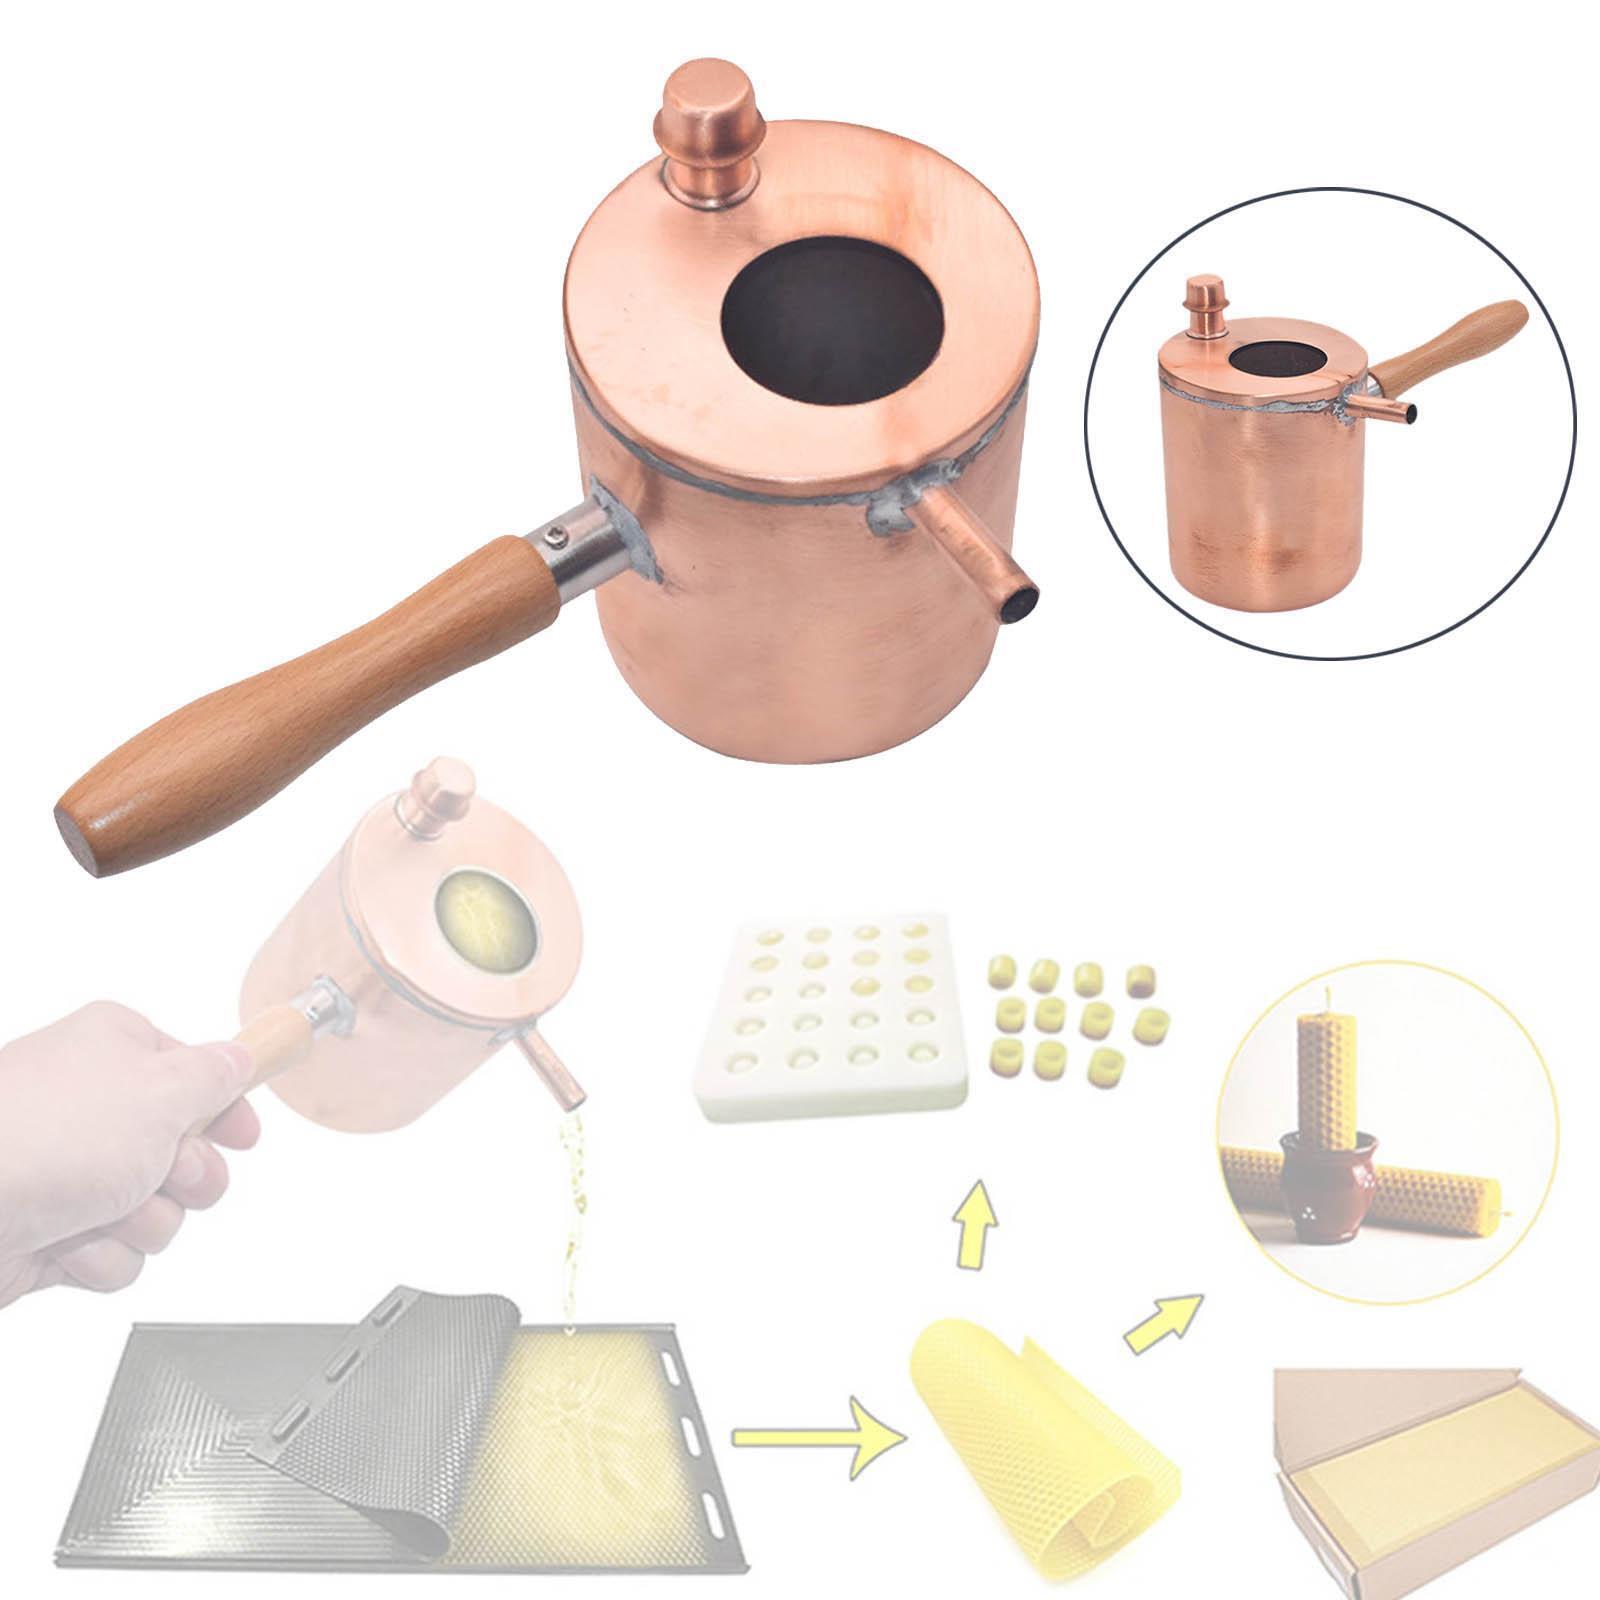 Wax Beeswax Melting Pot Tools Non Stick For Candle Making Boiling Adults Beeswax